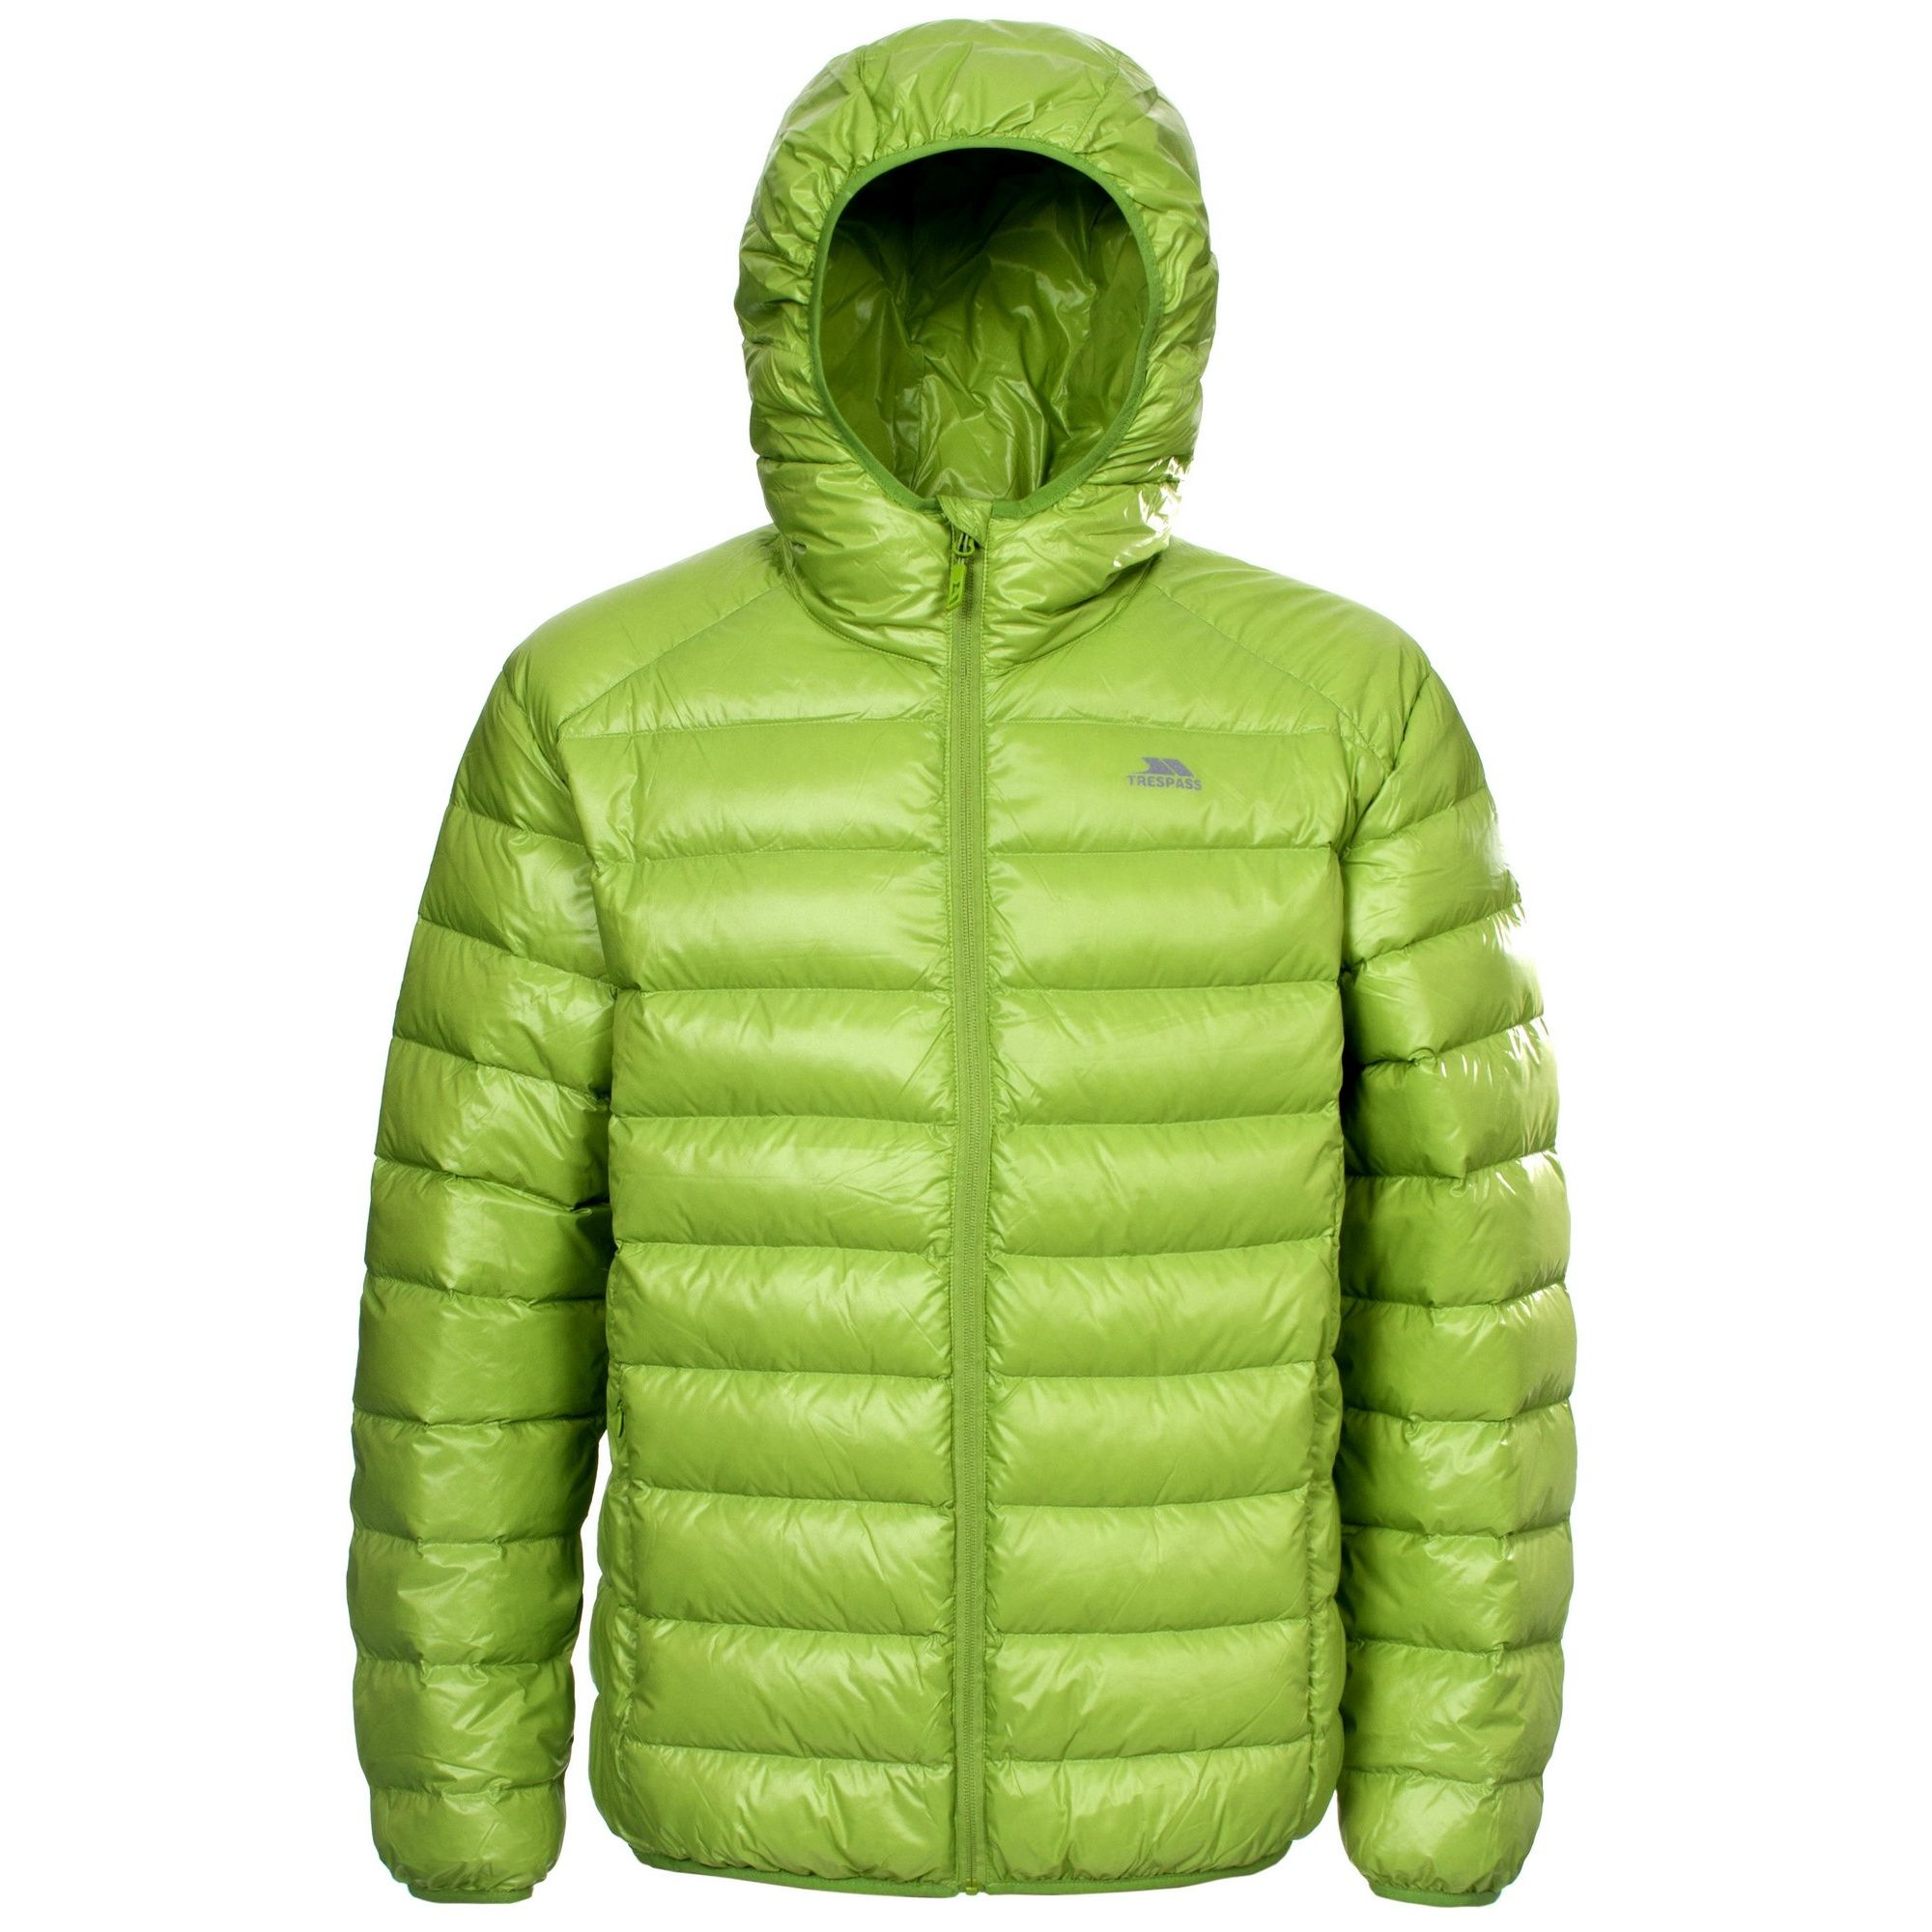 Ultra lightweight down jacket. Grown on hood. 2 Concealed zip pockets. Low profile front zip. Stuff sack in pocket. Downproof lining. Comfortable and very warm. This jacket has the added benefit that it packs away into a pouch. 80% Down 20% Feather, Shell: 100% Polyamide, Lining: 100% Polyamide.